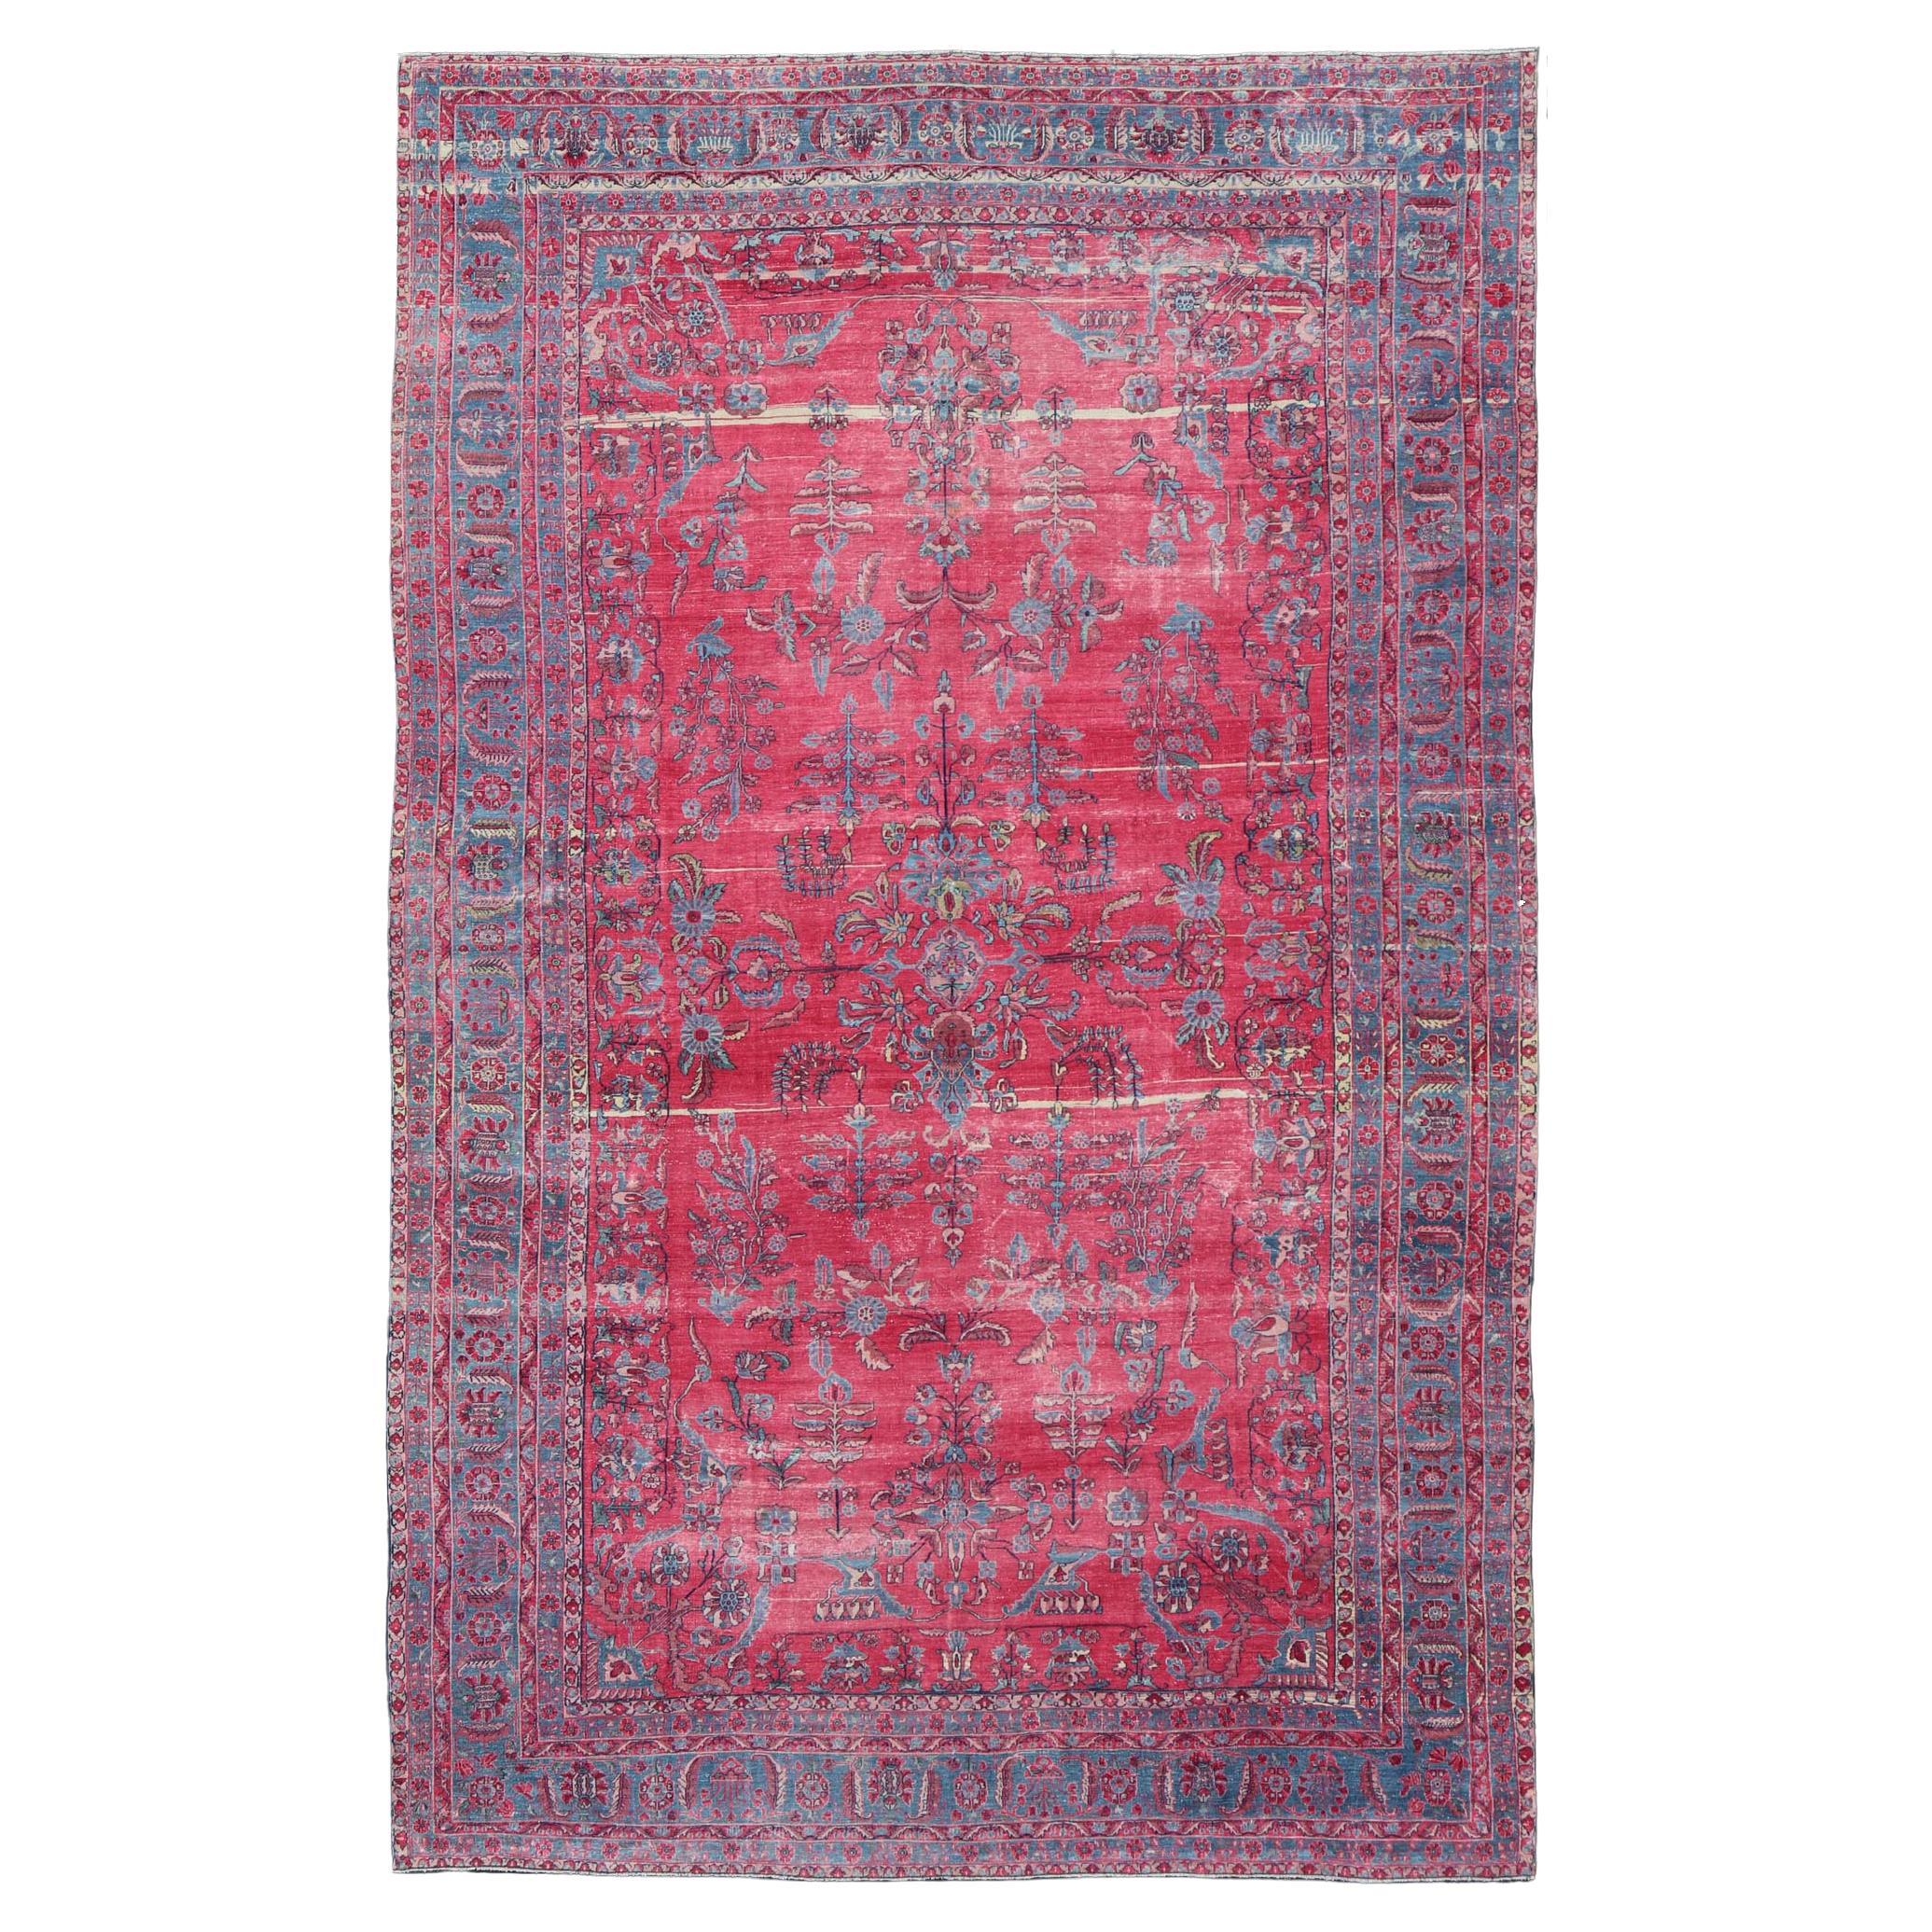 Antique Indian Lahore Large Carpet with Floral Design in Soft Magenta and Blue